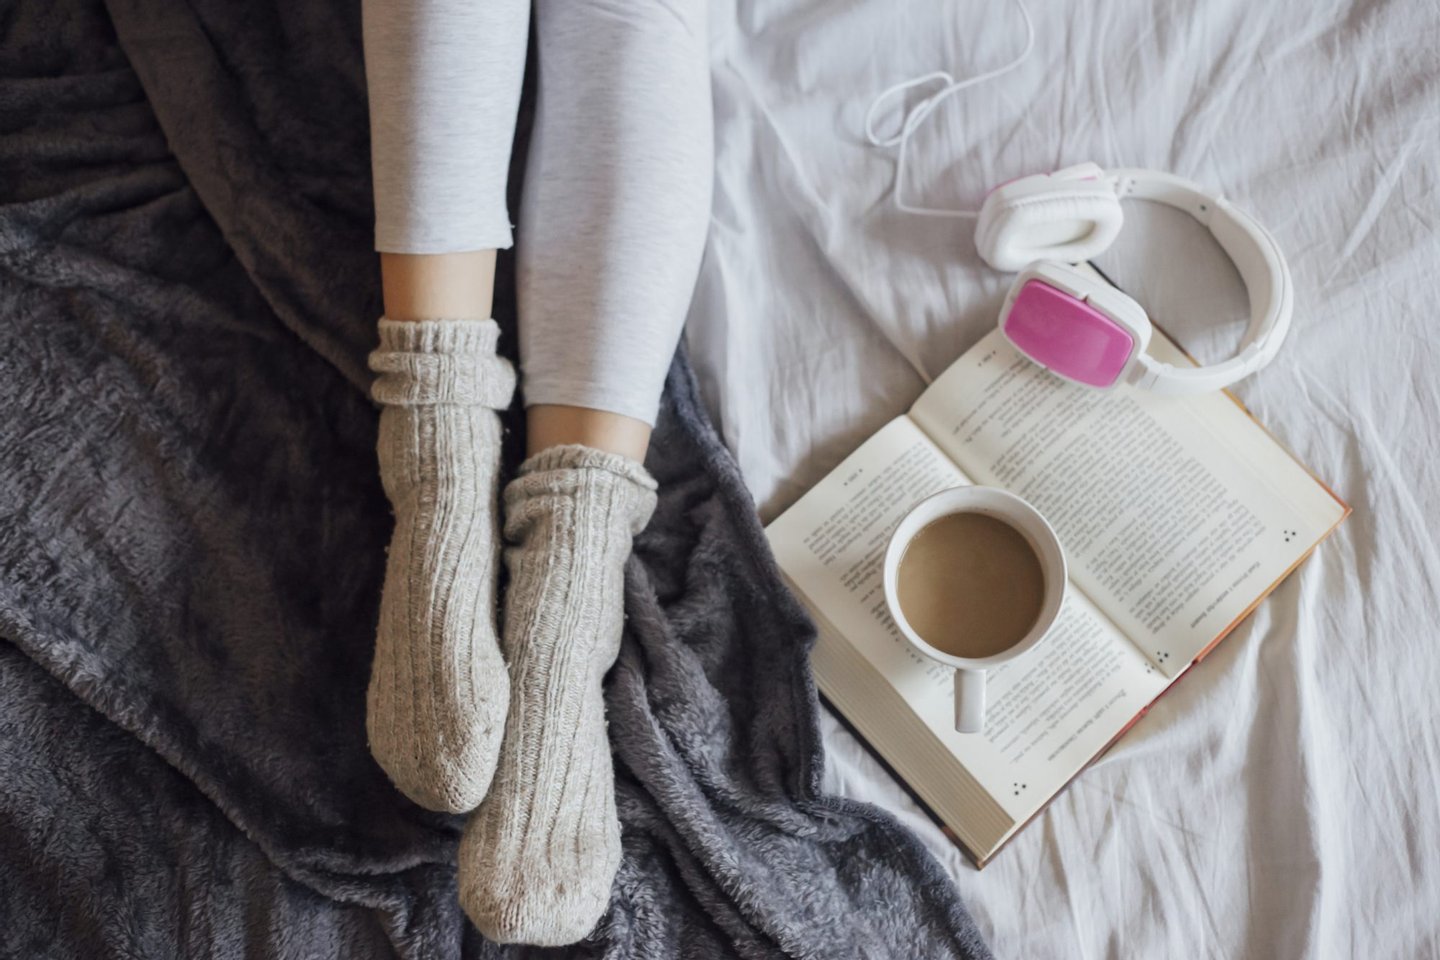 Beautiful, Leg Warmers, Adolescence, Morning, Girls, Women, Females, Comfortable, Softness, Sock, Cute, Music, Headphones, Young Adult, Teenager, Reading, Resting, Beauty, Caucasian Ethnicity, Heat - Temperature, Relaxation, Tranquil Scene, Woven, Wool, On Top Of, Inside Of, Lifestyles, Indoors, Human Leg, Winter, Bedroom, Home Interior, Book, Clothing, Cup, Bed, woolen, Hipster, 